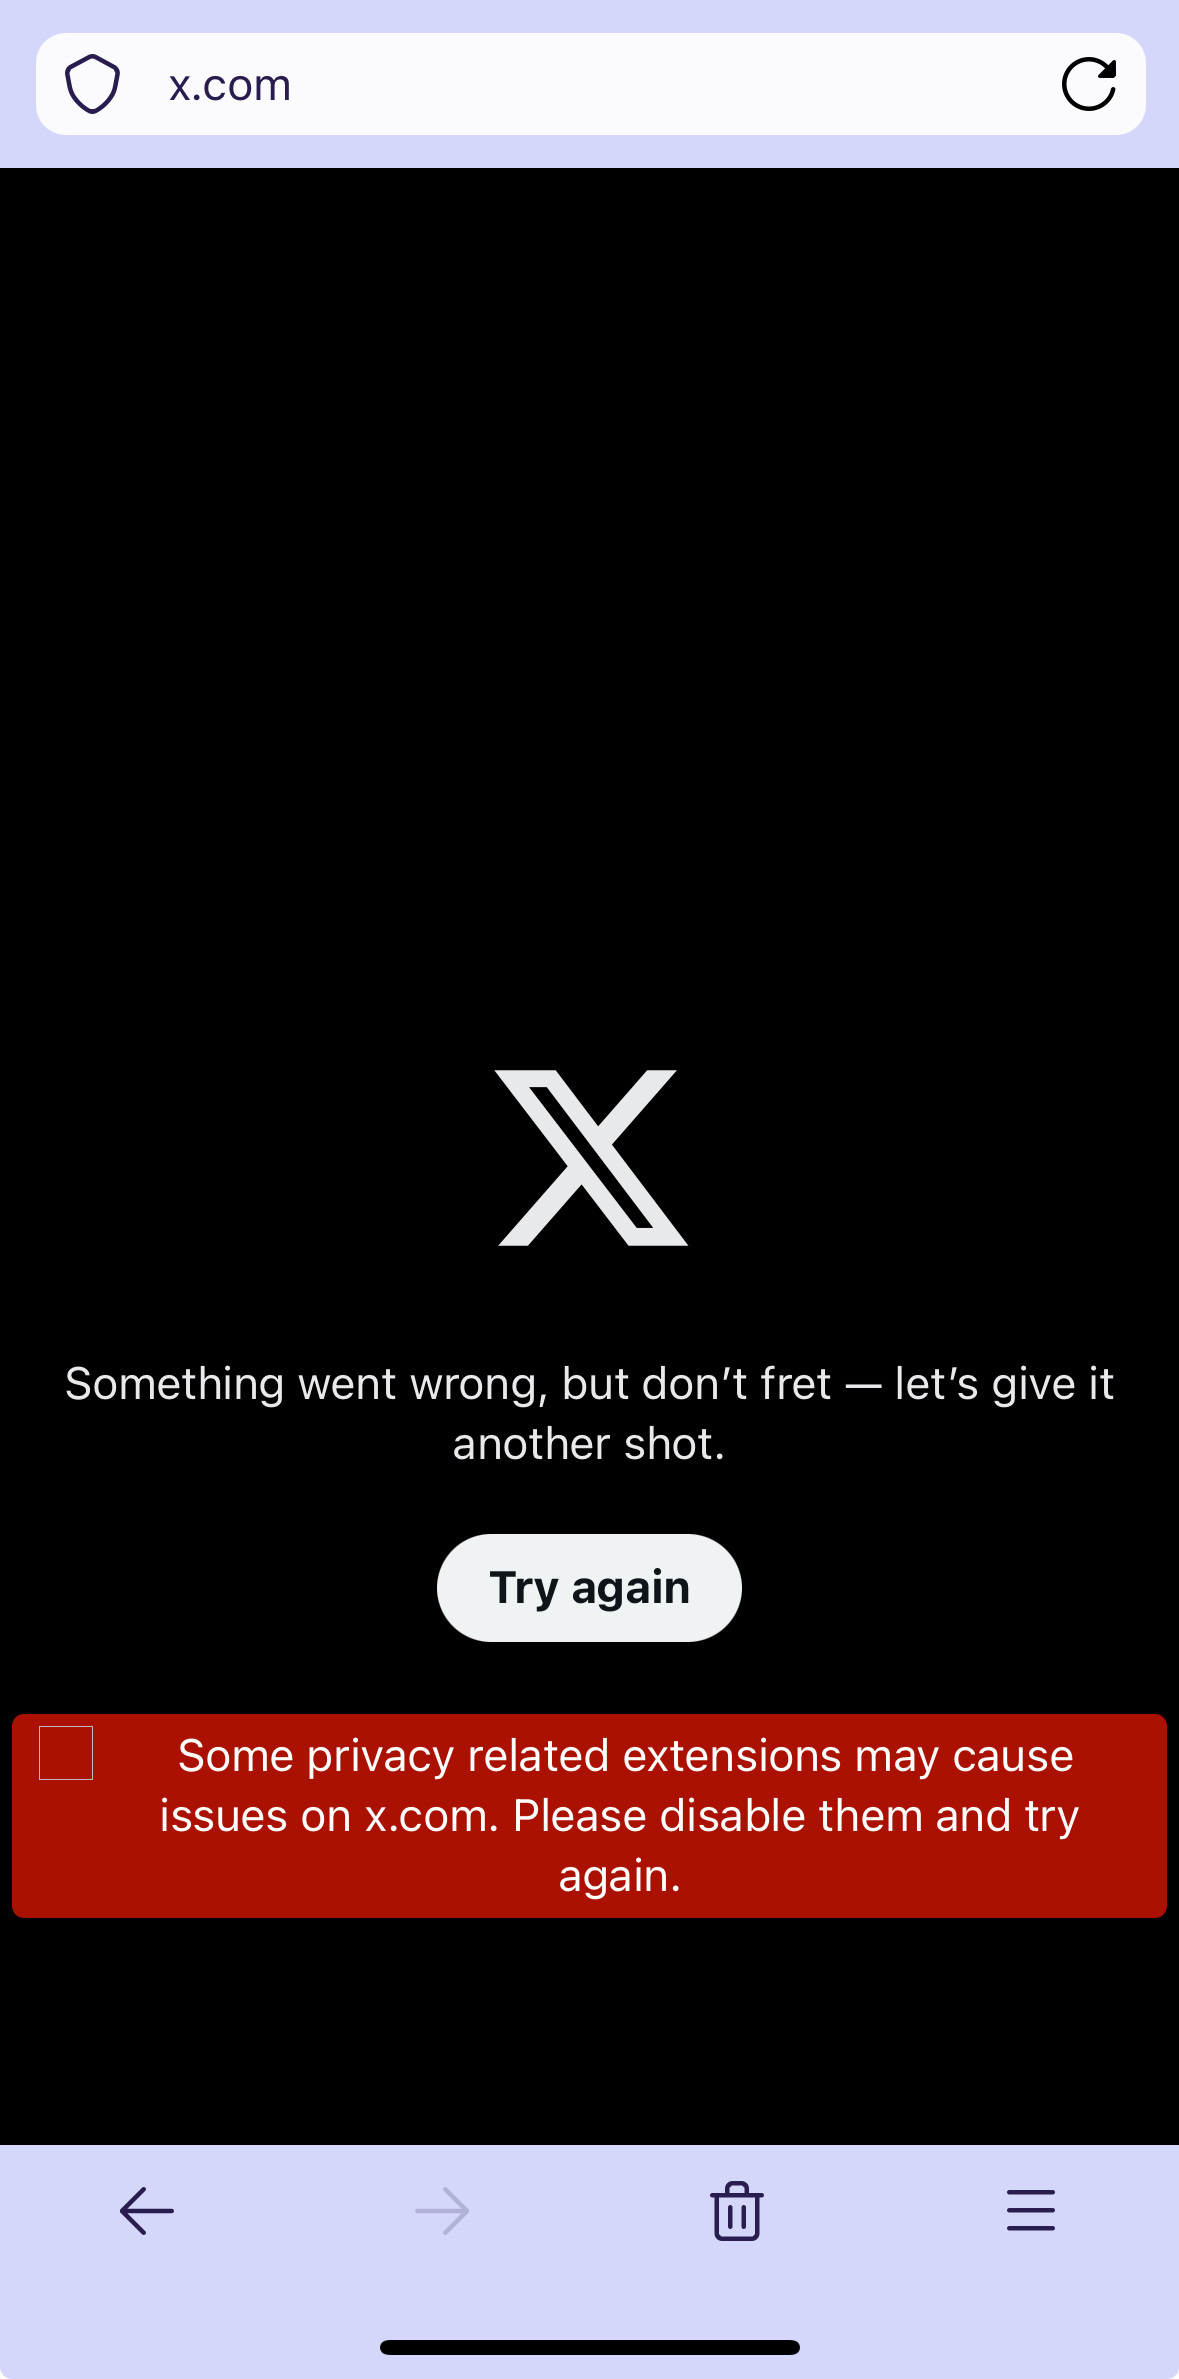 Screenshot of a browser displaying an error message from x.com, indicating something went wrong. The screen suggests trying again and warns that privacy-related extensions might be causing issues, advising to disable them and try again. The background is black with the X logo centered at the top.